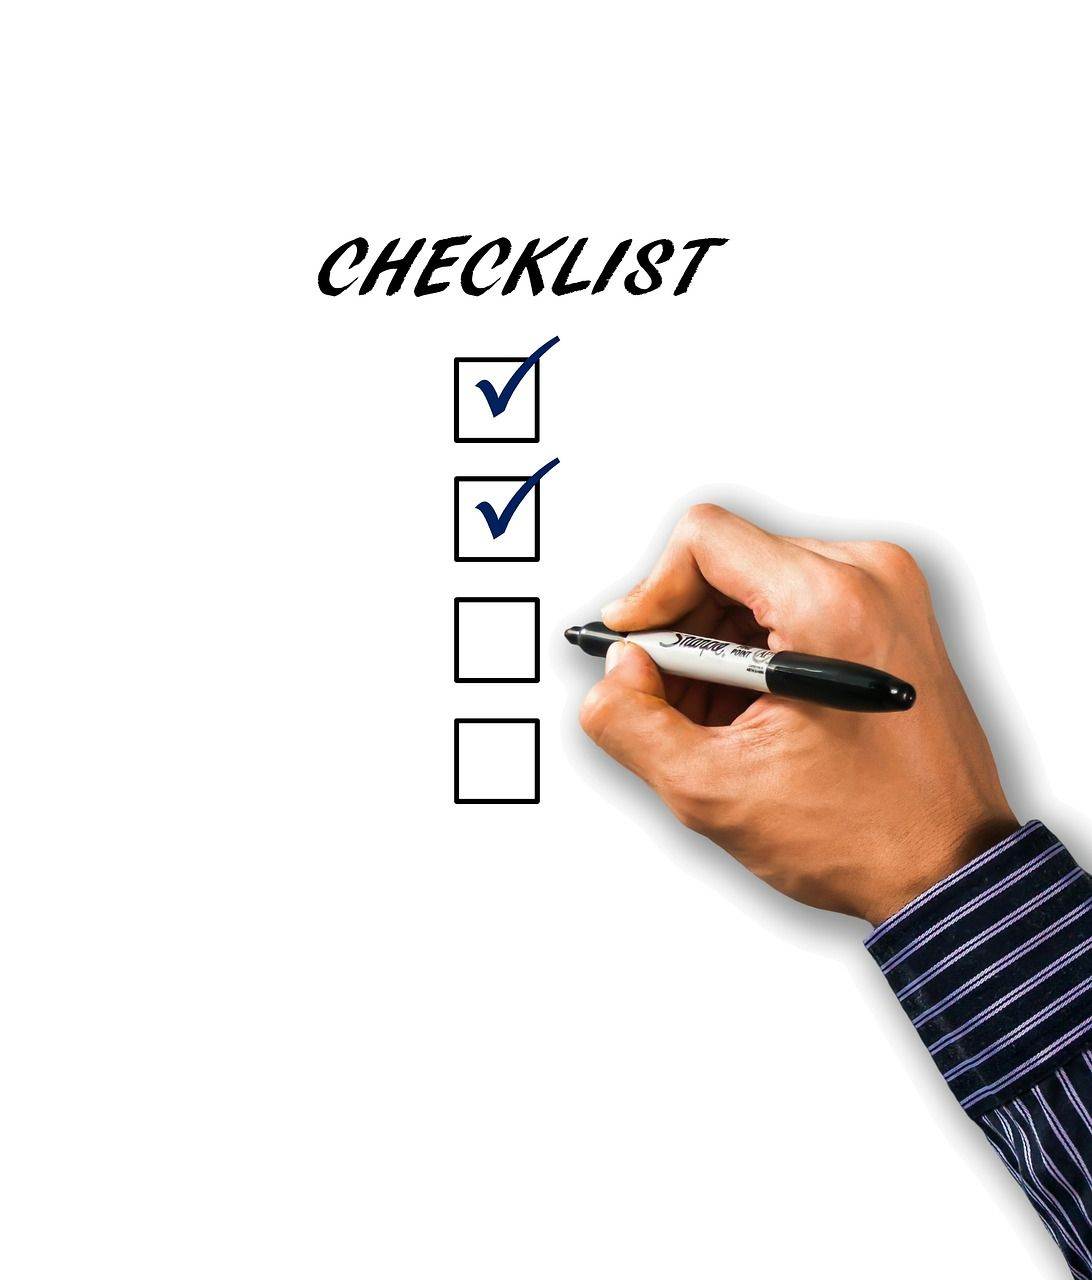 Image of a hand ticking a checklist